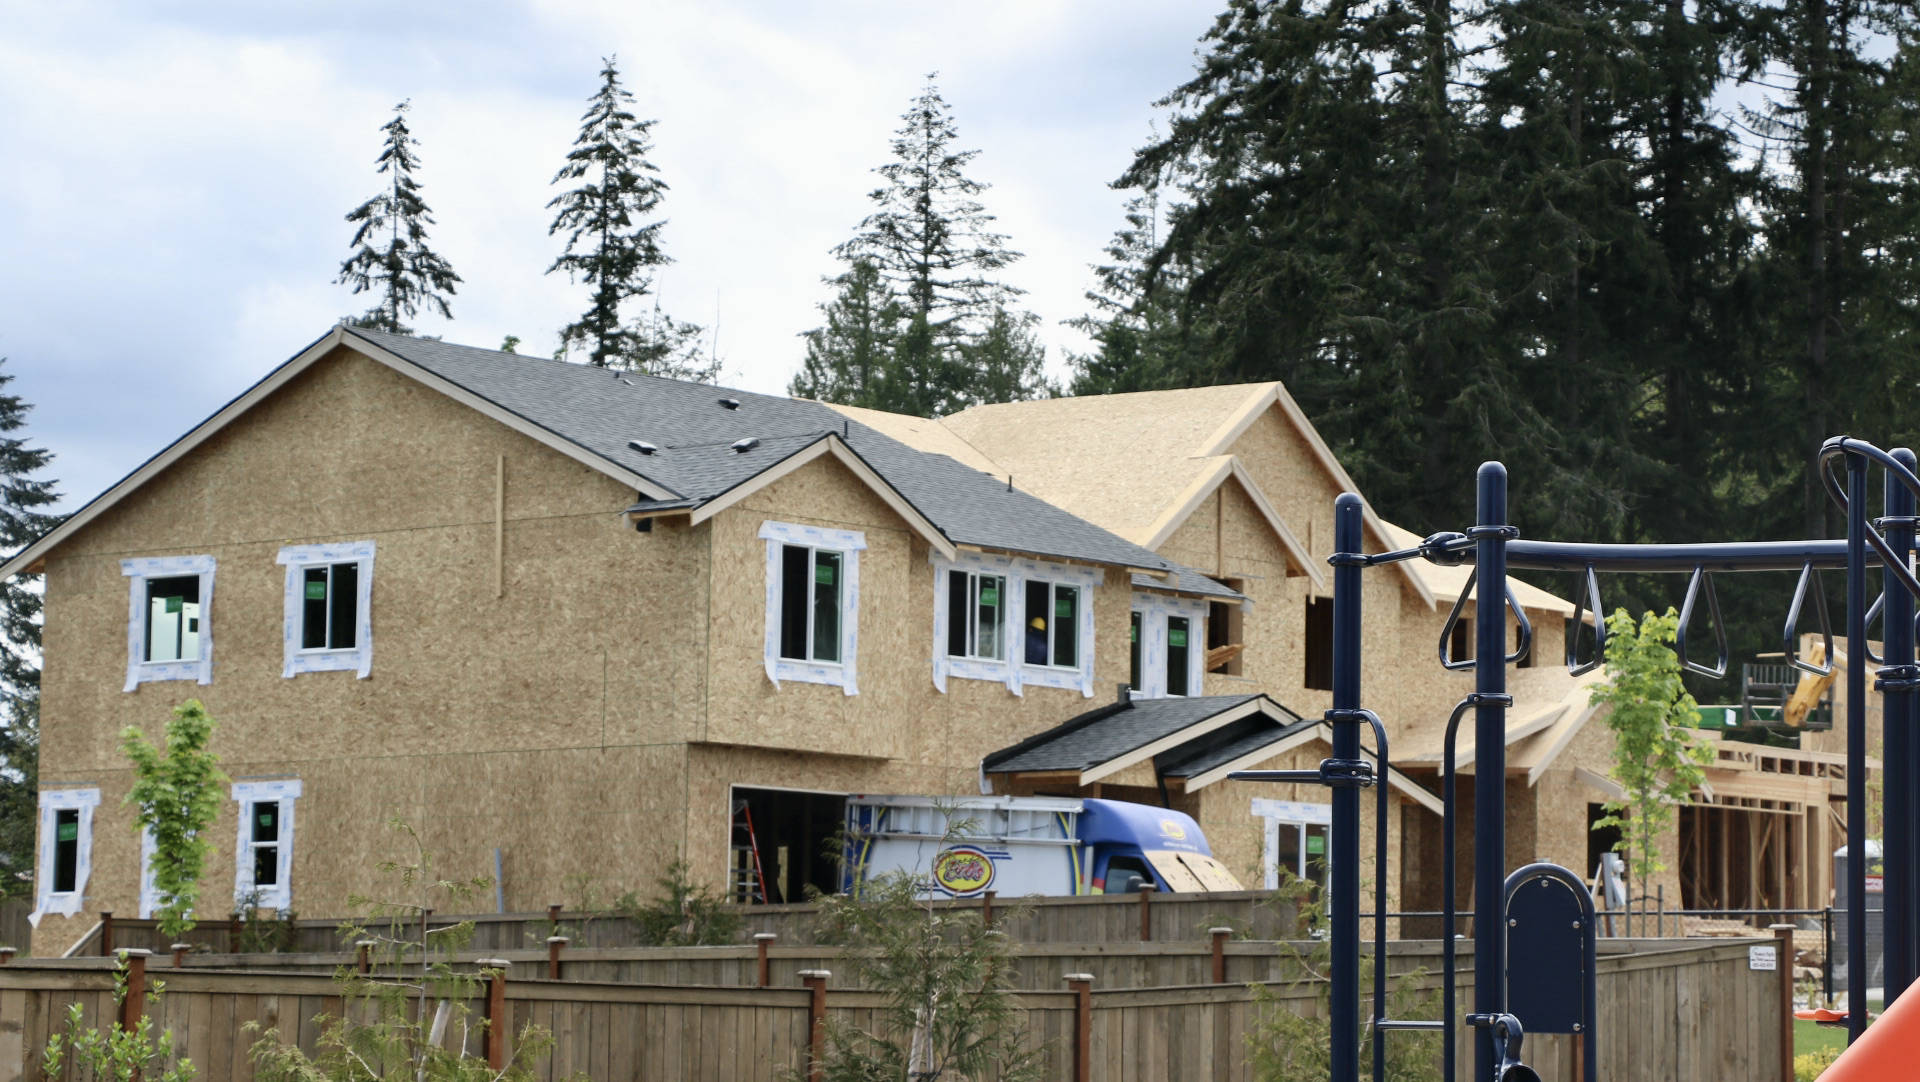 Two large single-family homes take shape in the new Poulsbo Meadows neighborhood. One of several housing developments that will be growing over the next 12-18 months. (KPark/NKH)